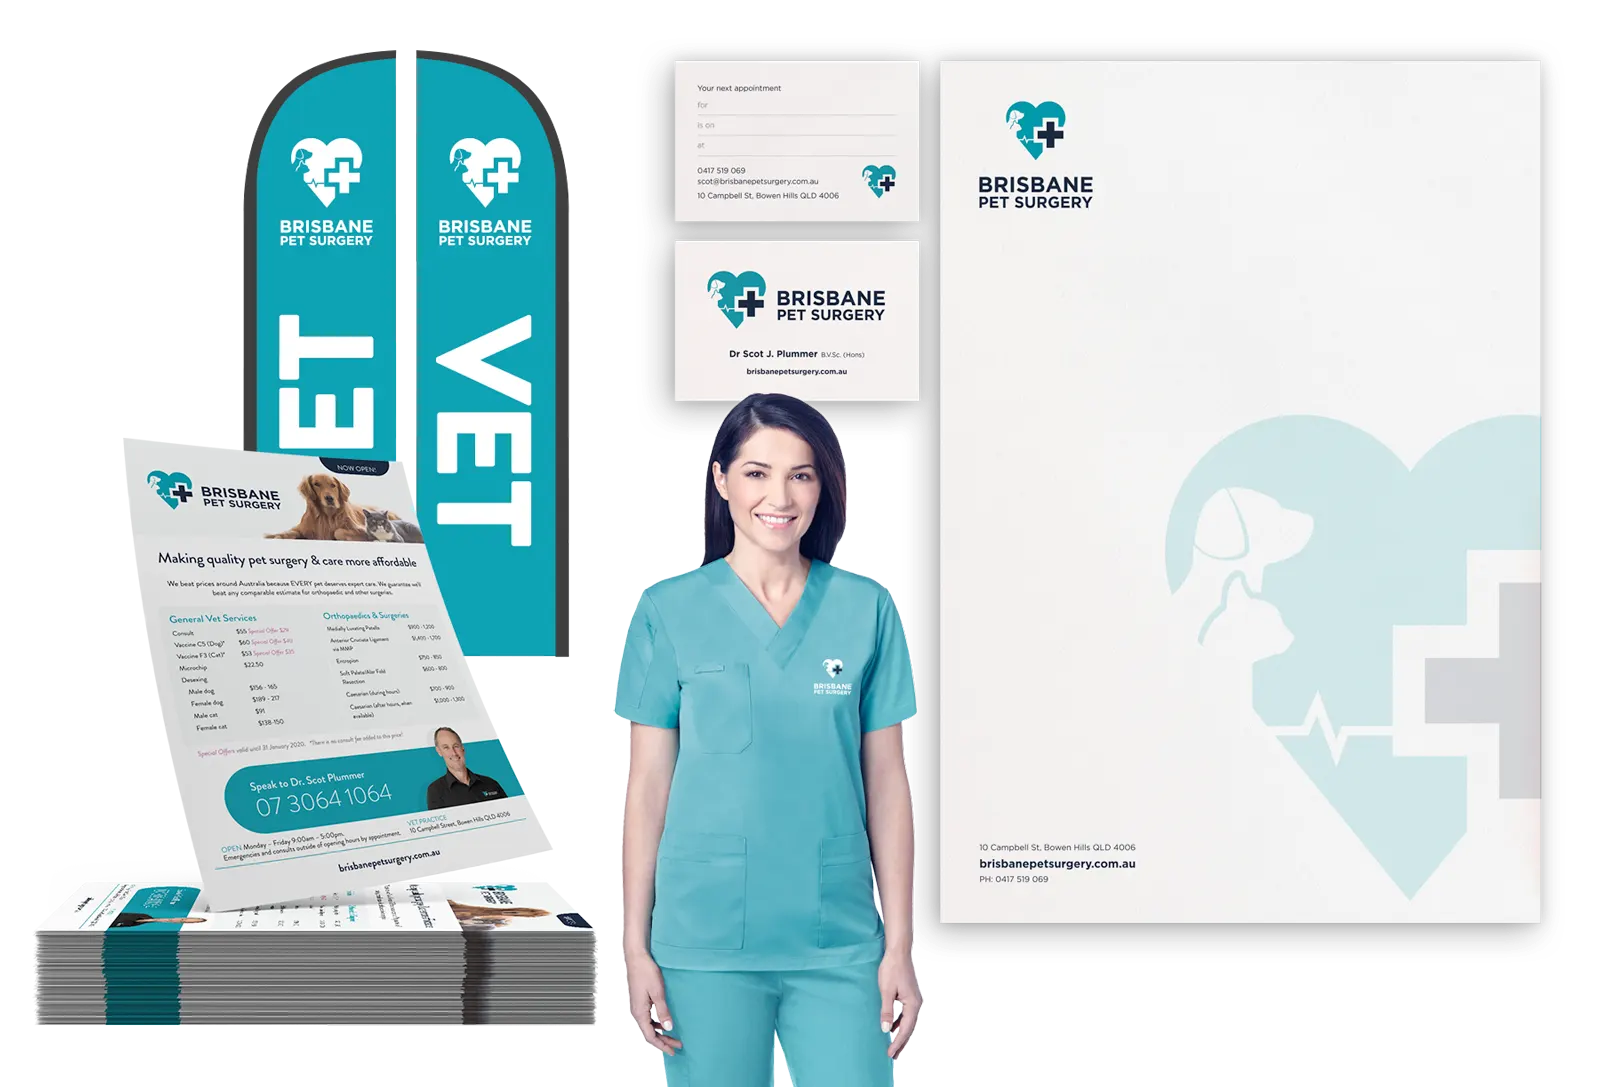 Zeemo helped Brisbane Pet Surgery finalise their brand name, identity and domain